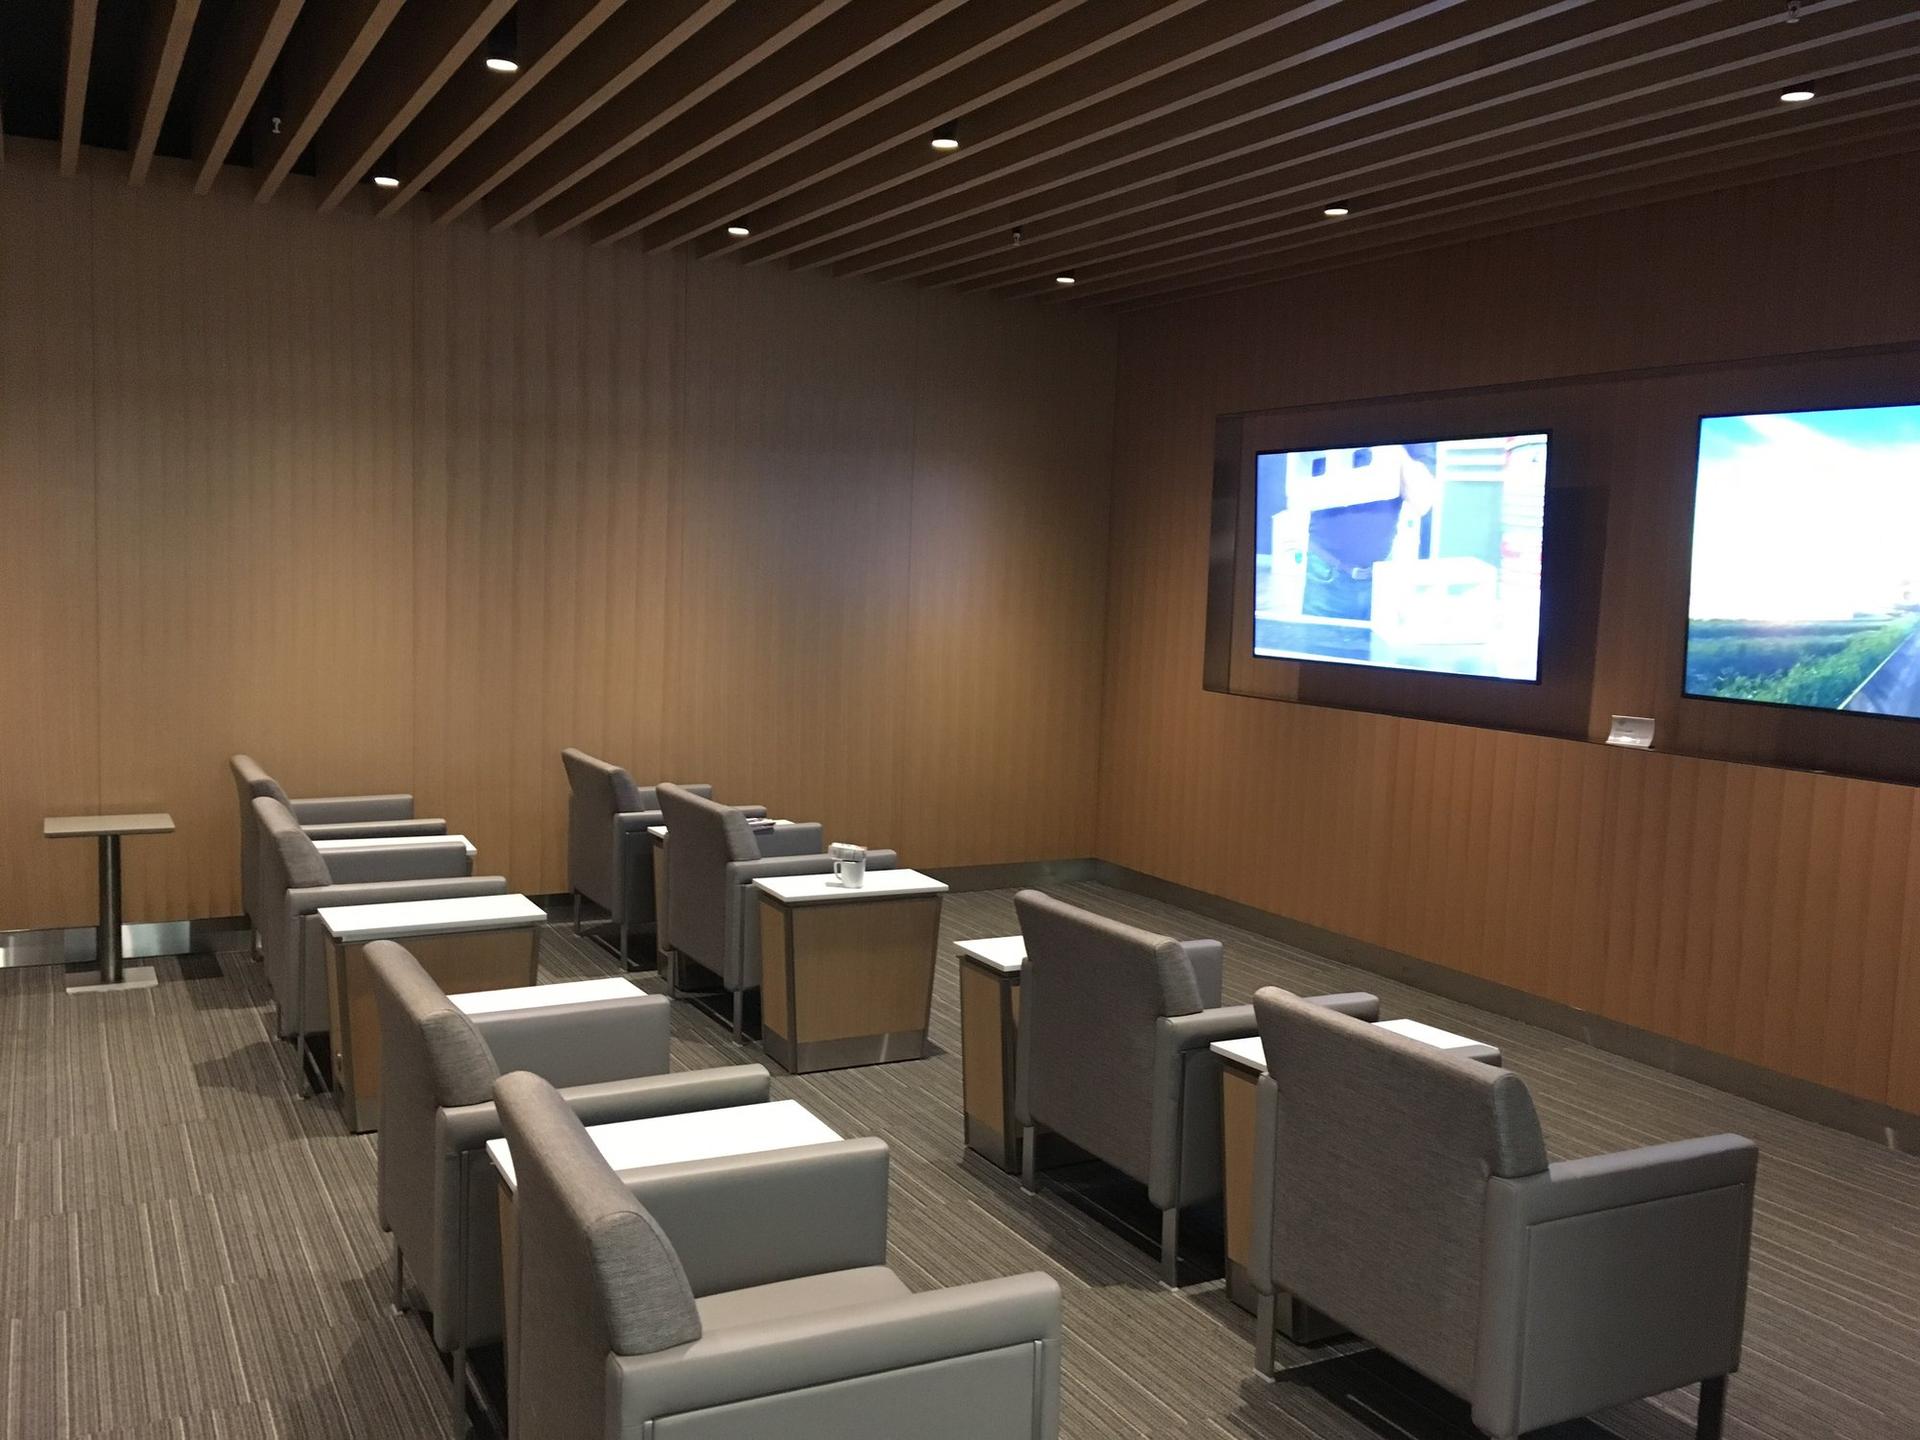 American Airlines Flagship Lounge image 36 of 65